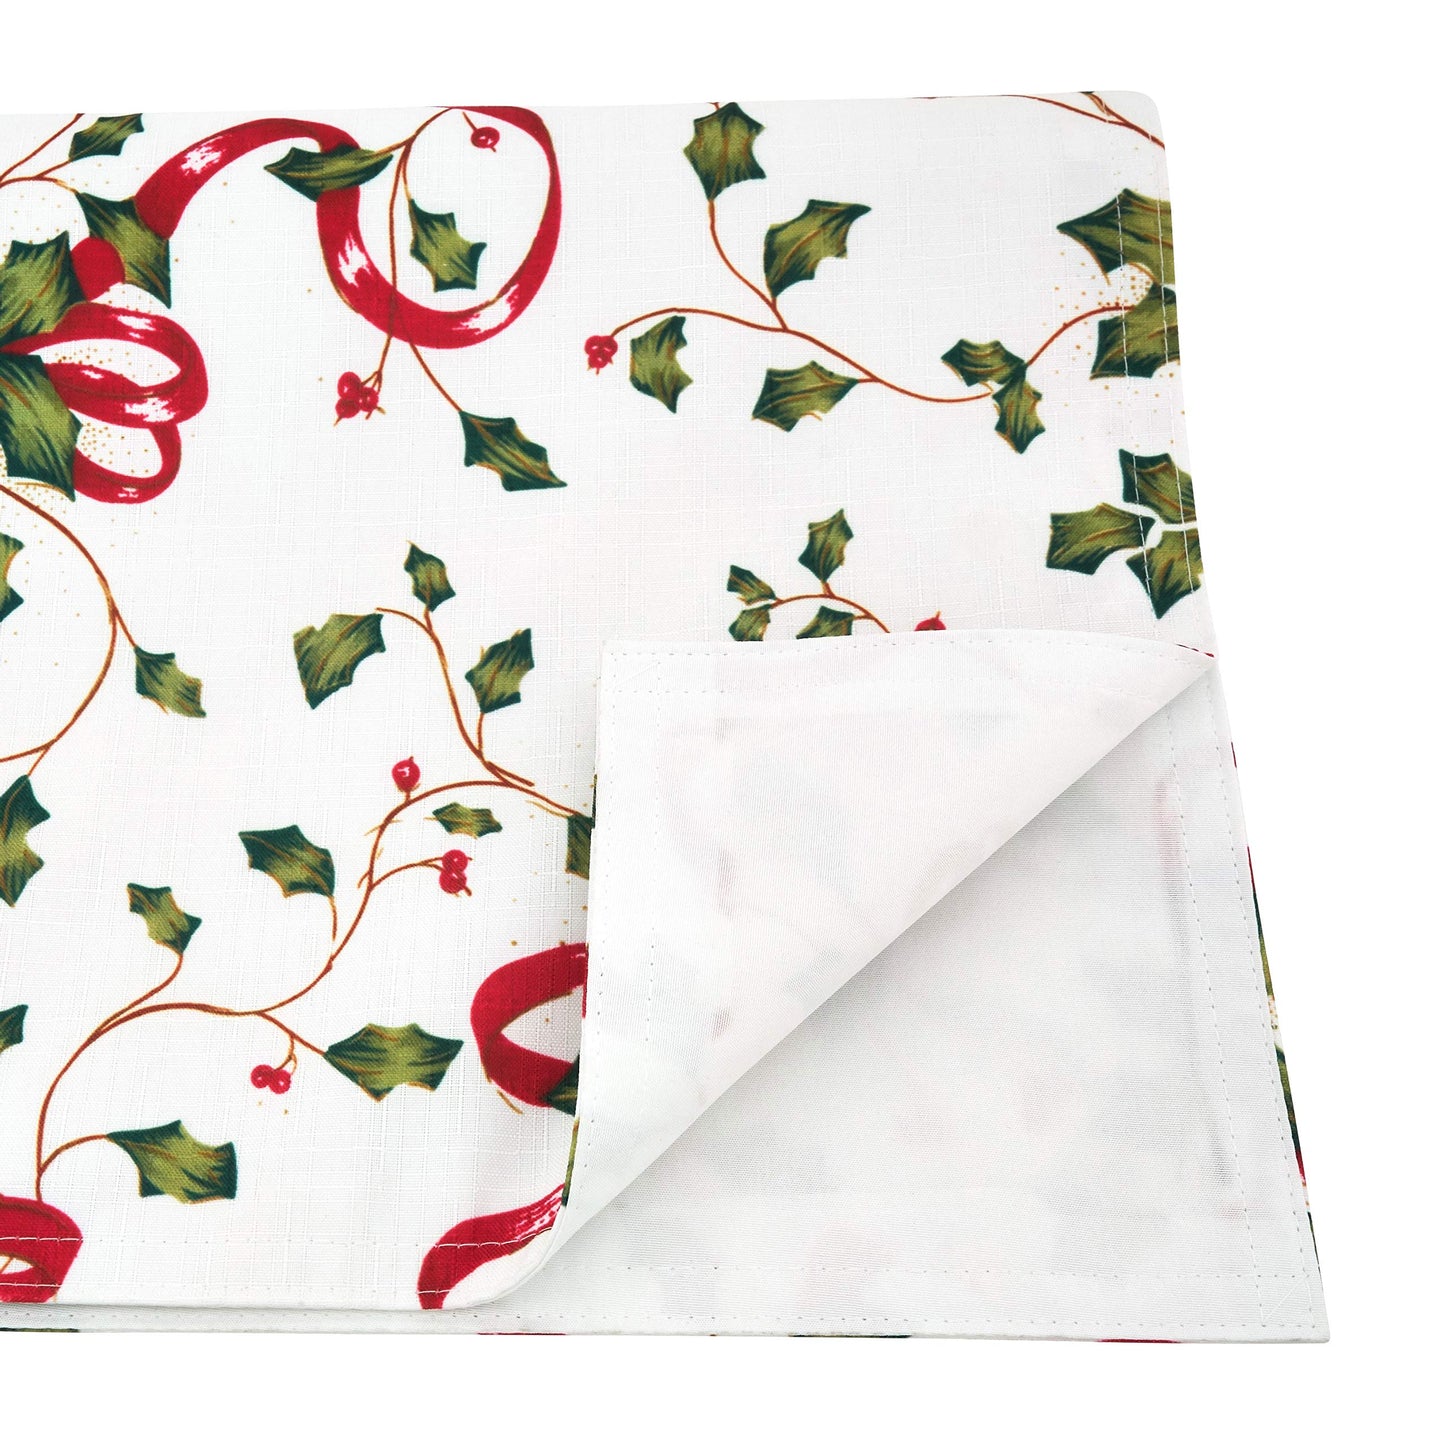 Fennco Styles Holiday Holly Collection Classic Holly Berry with Ribbon Printed Table Linens – Multicolor Table Linens for Christmas Dinner, Family Gathering, Special Events and Home Décor